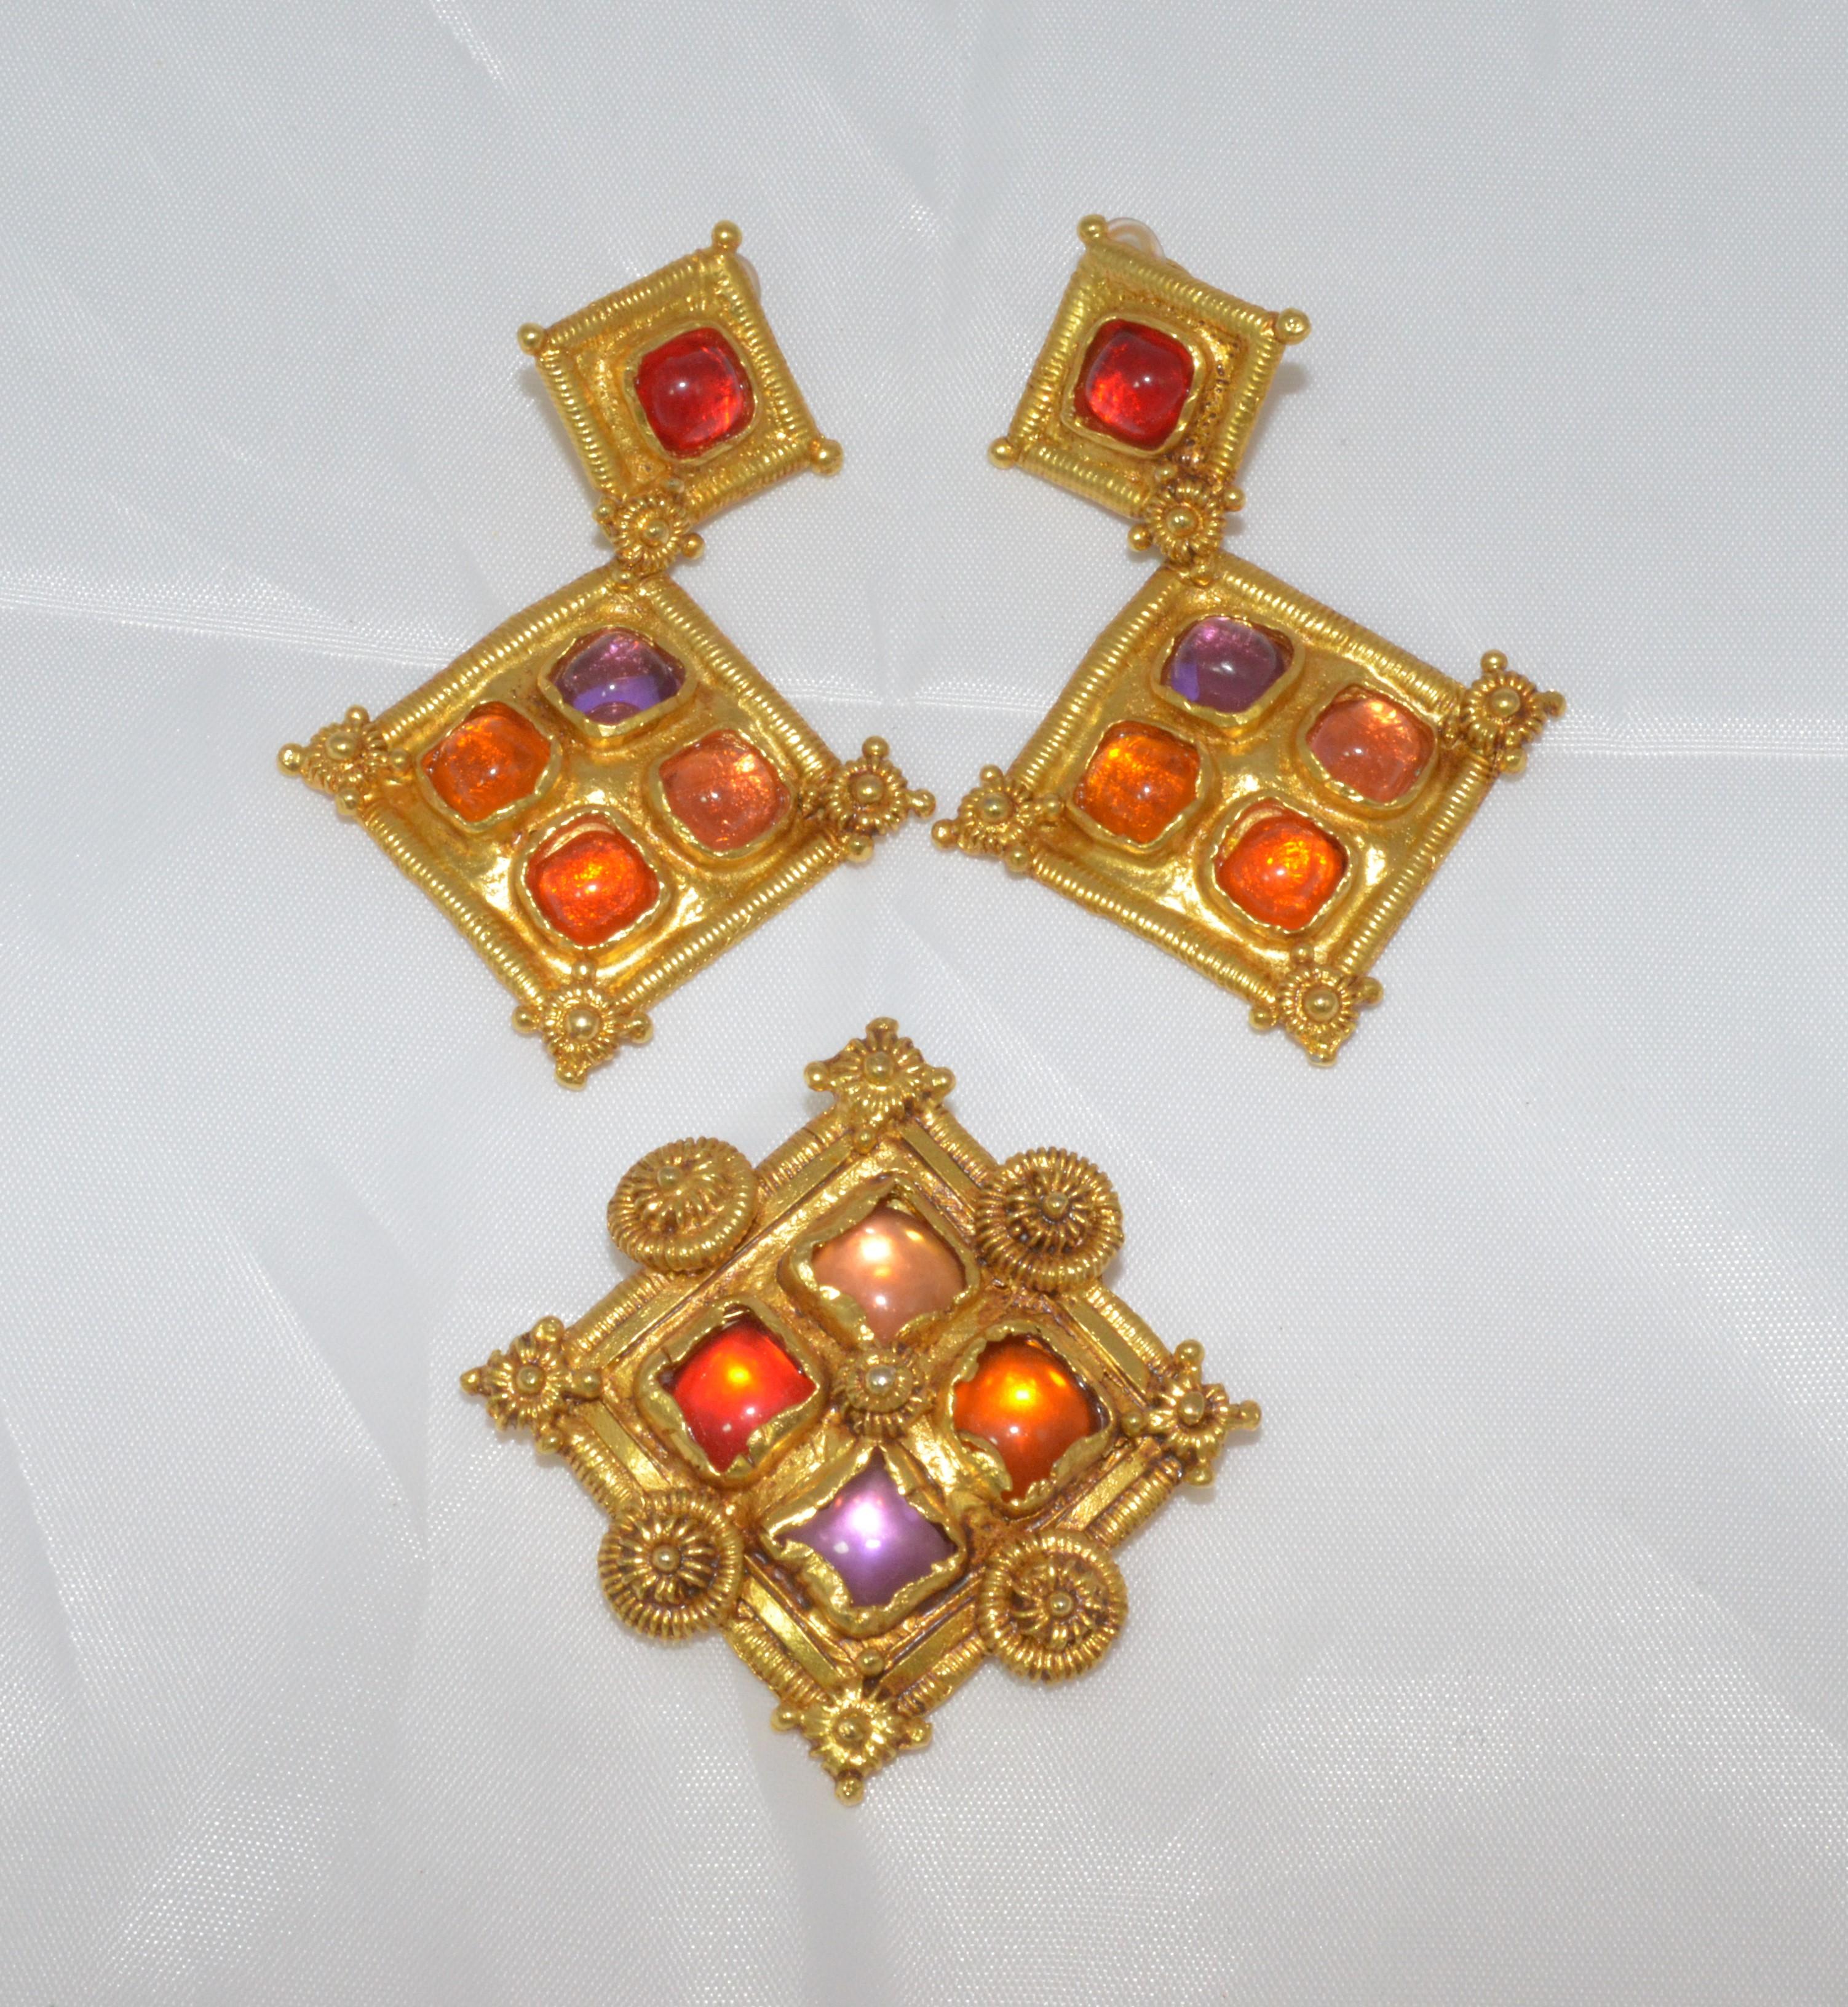 Christian Lacroix Brooch and Clip-On Earrings Set -- Set is featured in gold with red, purple, and orange stones (possibly glass) and designer stamp at the backs. Brooch and earrings are in excellent pre-owned condition.

Measurements:
Earrings -